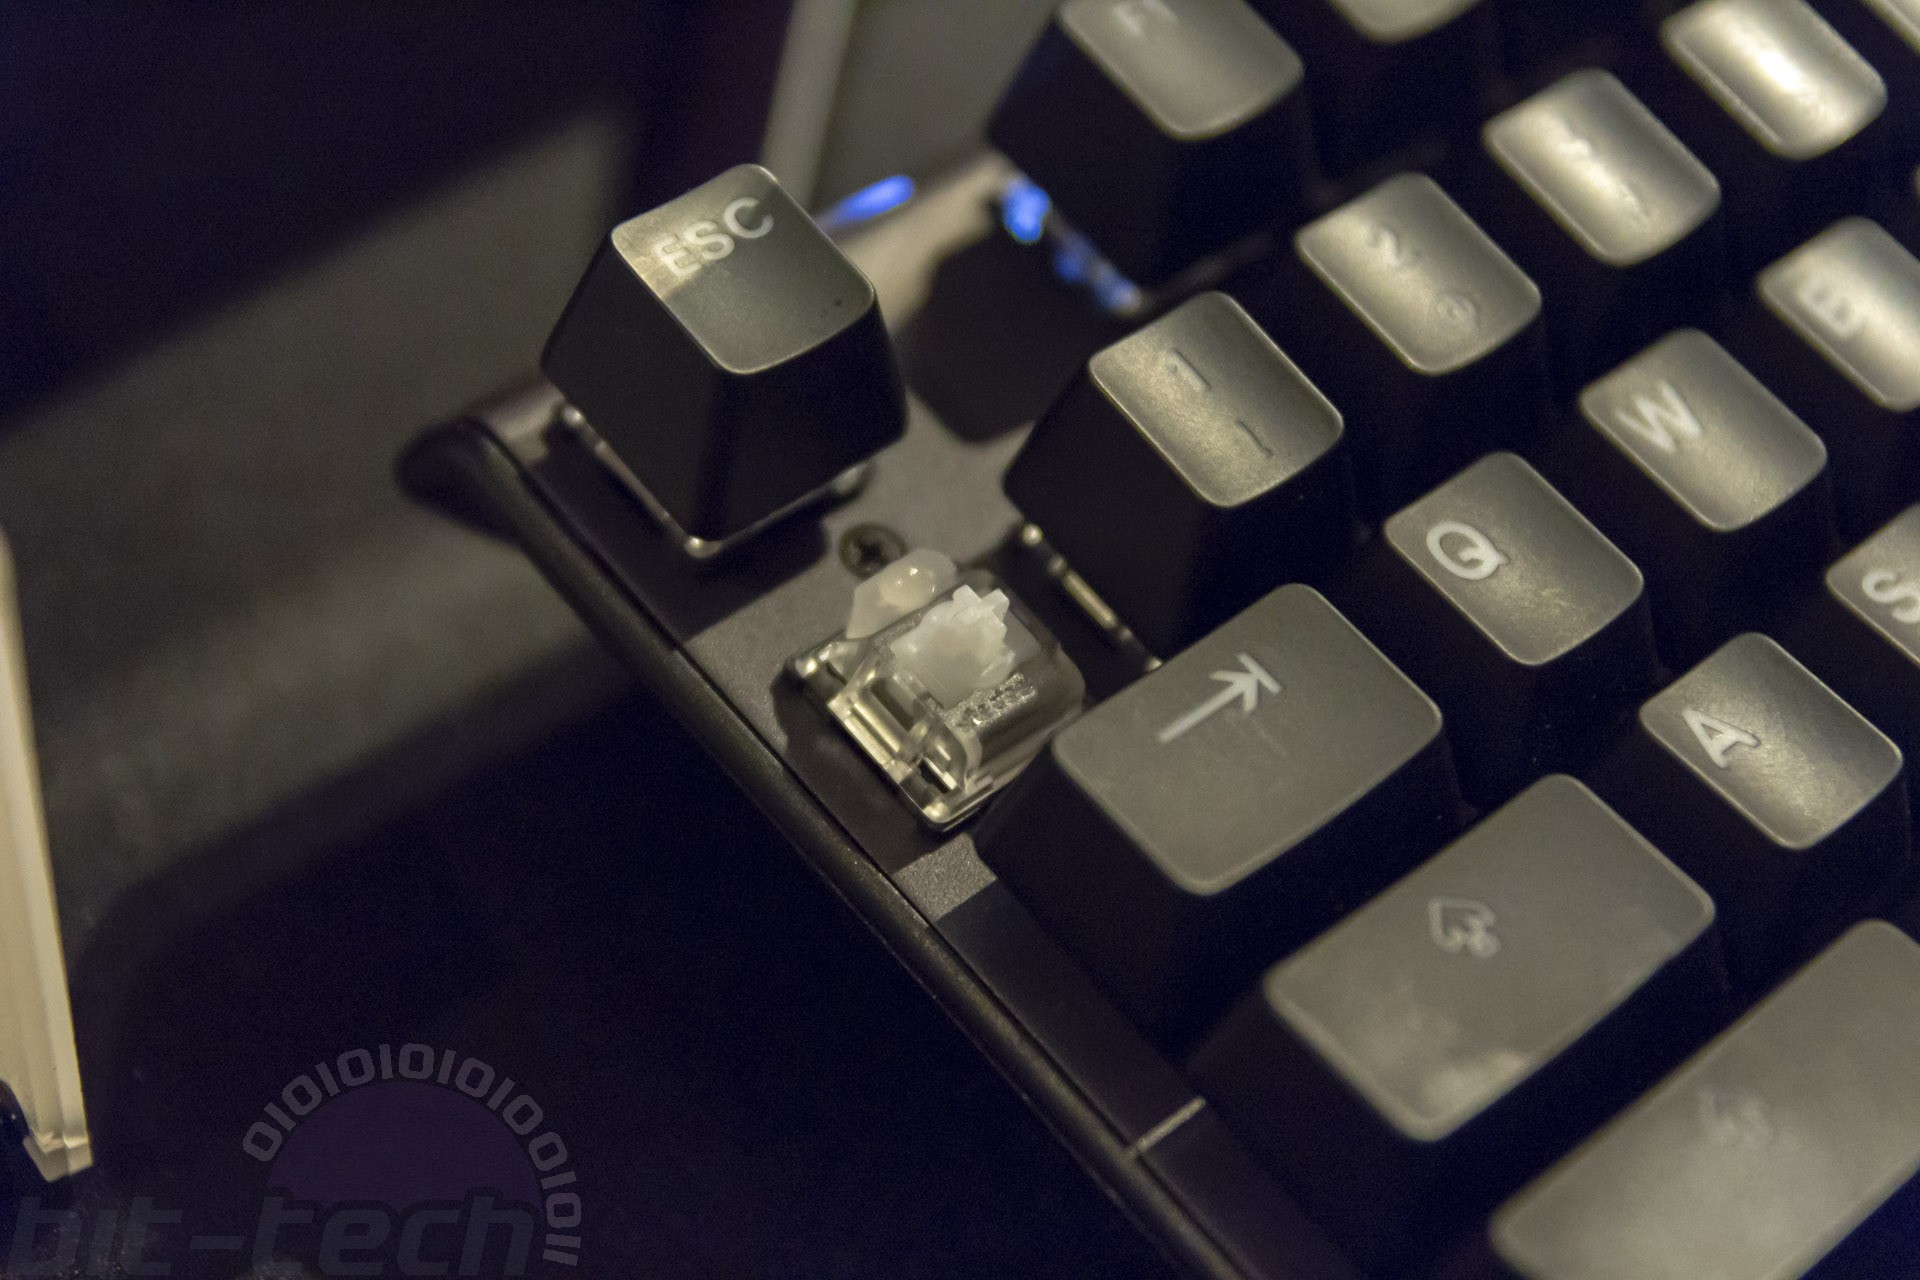 Steelseries Launches New Apex Keyboards With Adjustable Actuation Height Bit Tech Net